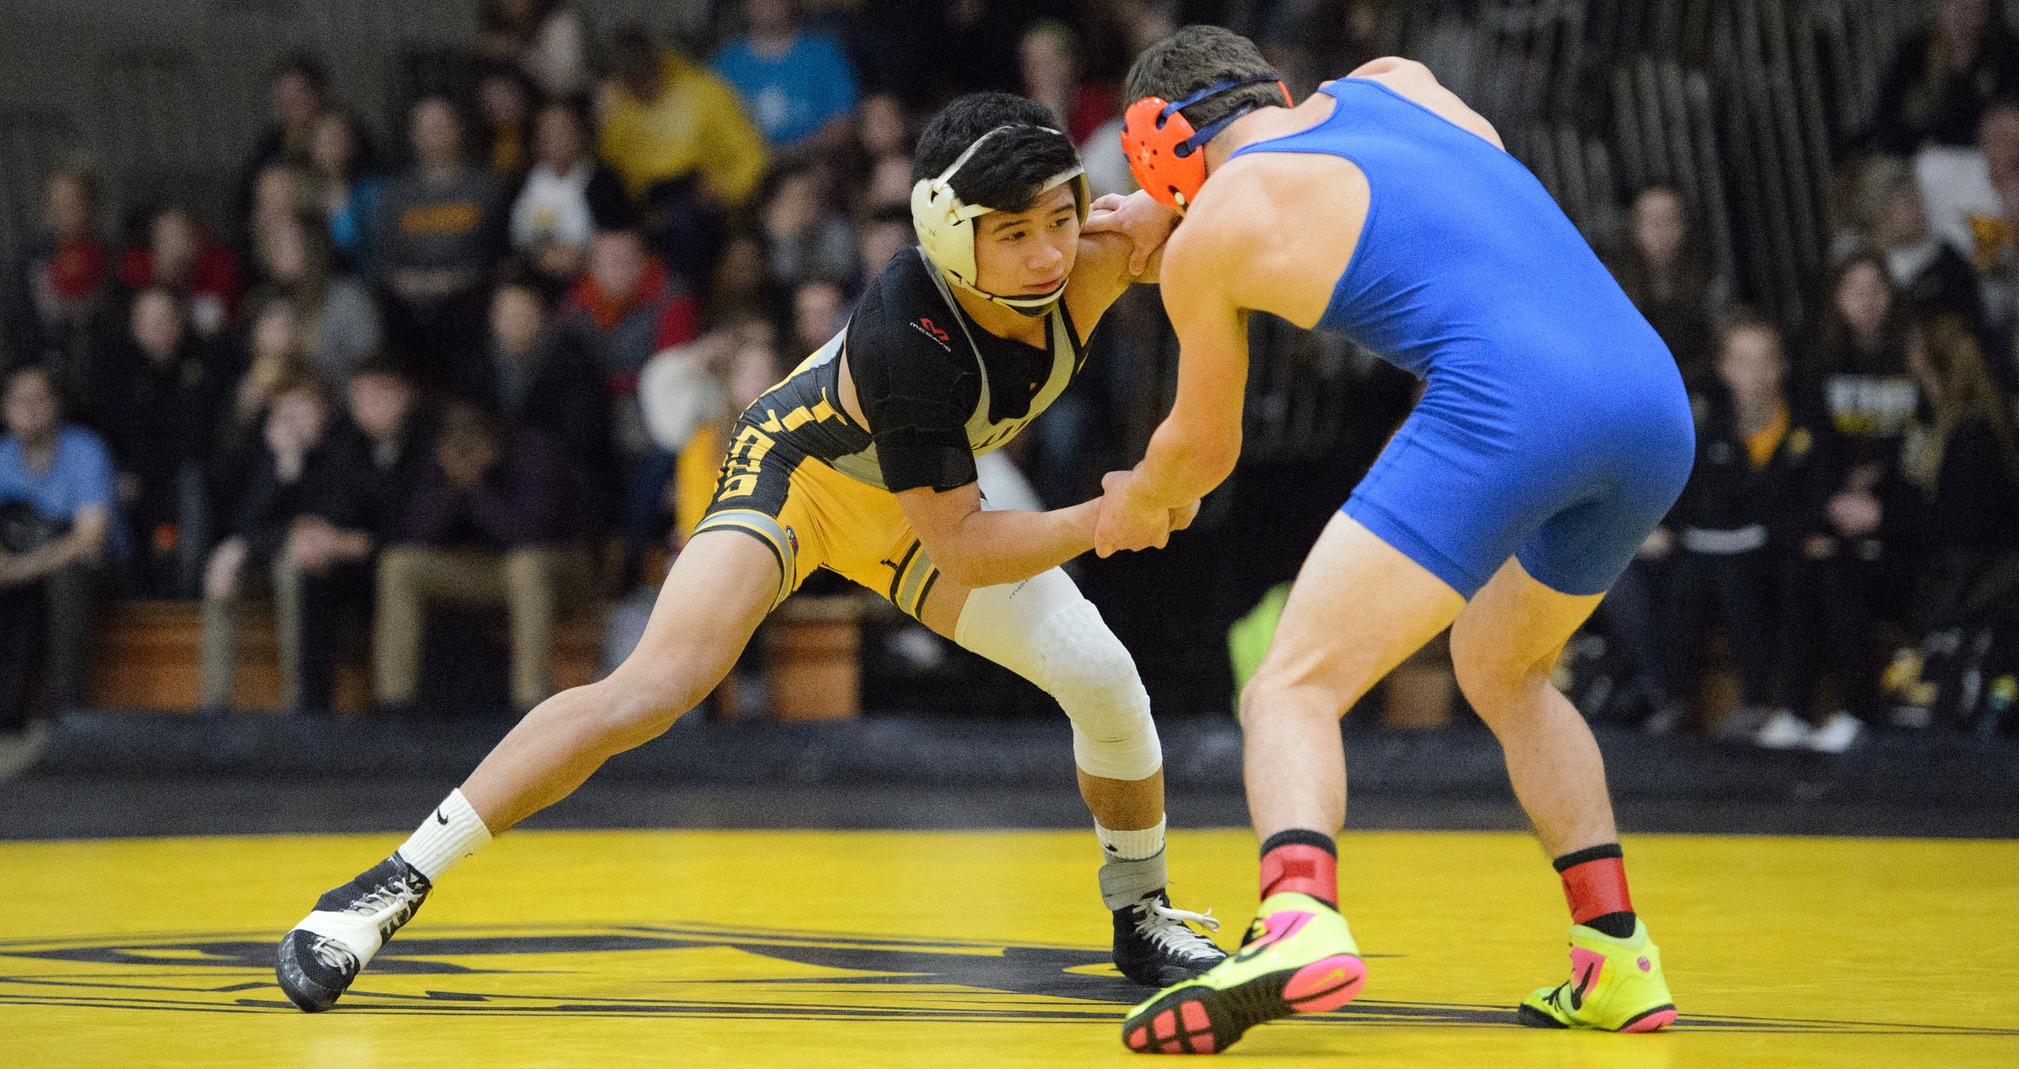 Anthony Senthavisouk earned a 13-7 victory during his contest at 133 pounds.